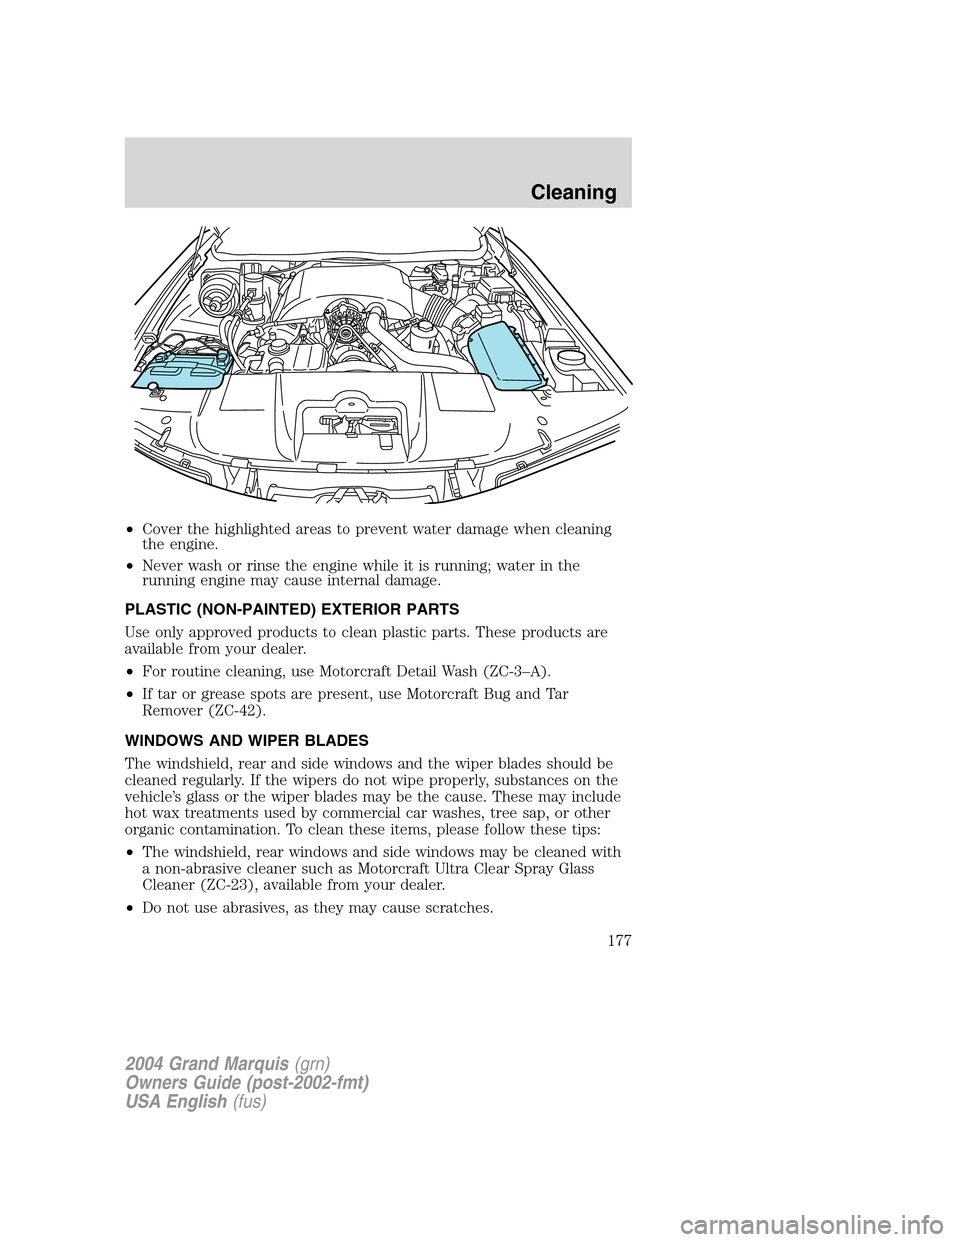 Mercury Grand Marquis 2004  Owners Manuals •Cover the highlighted areas to prevent water damage when cleaning
the engine.
•Never wash or rinse the engine while it is running; water in the
running engine may cause internal damage.
PLASTIC (